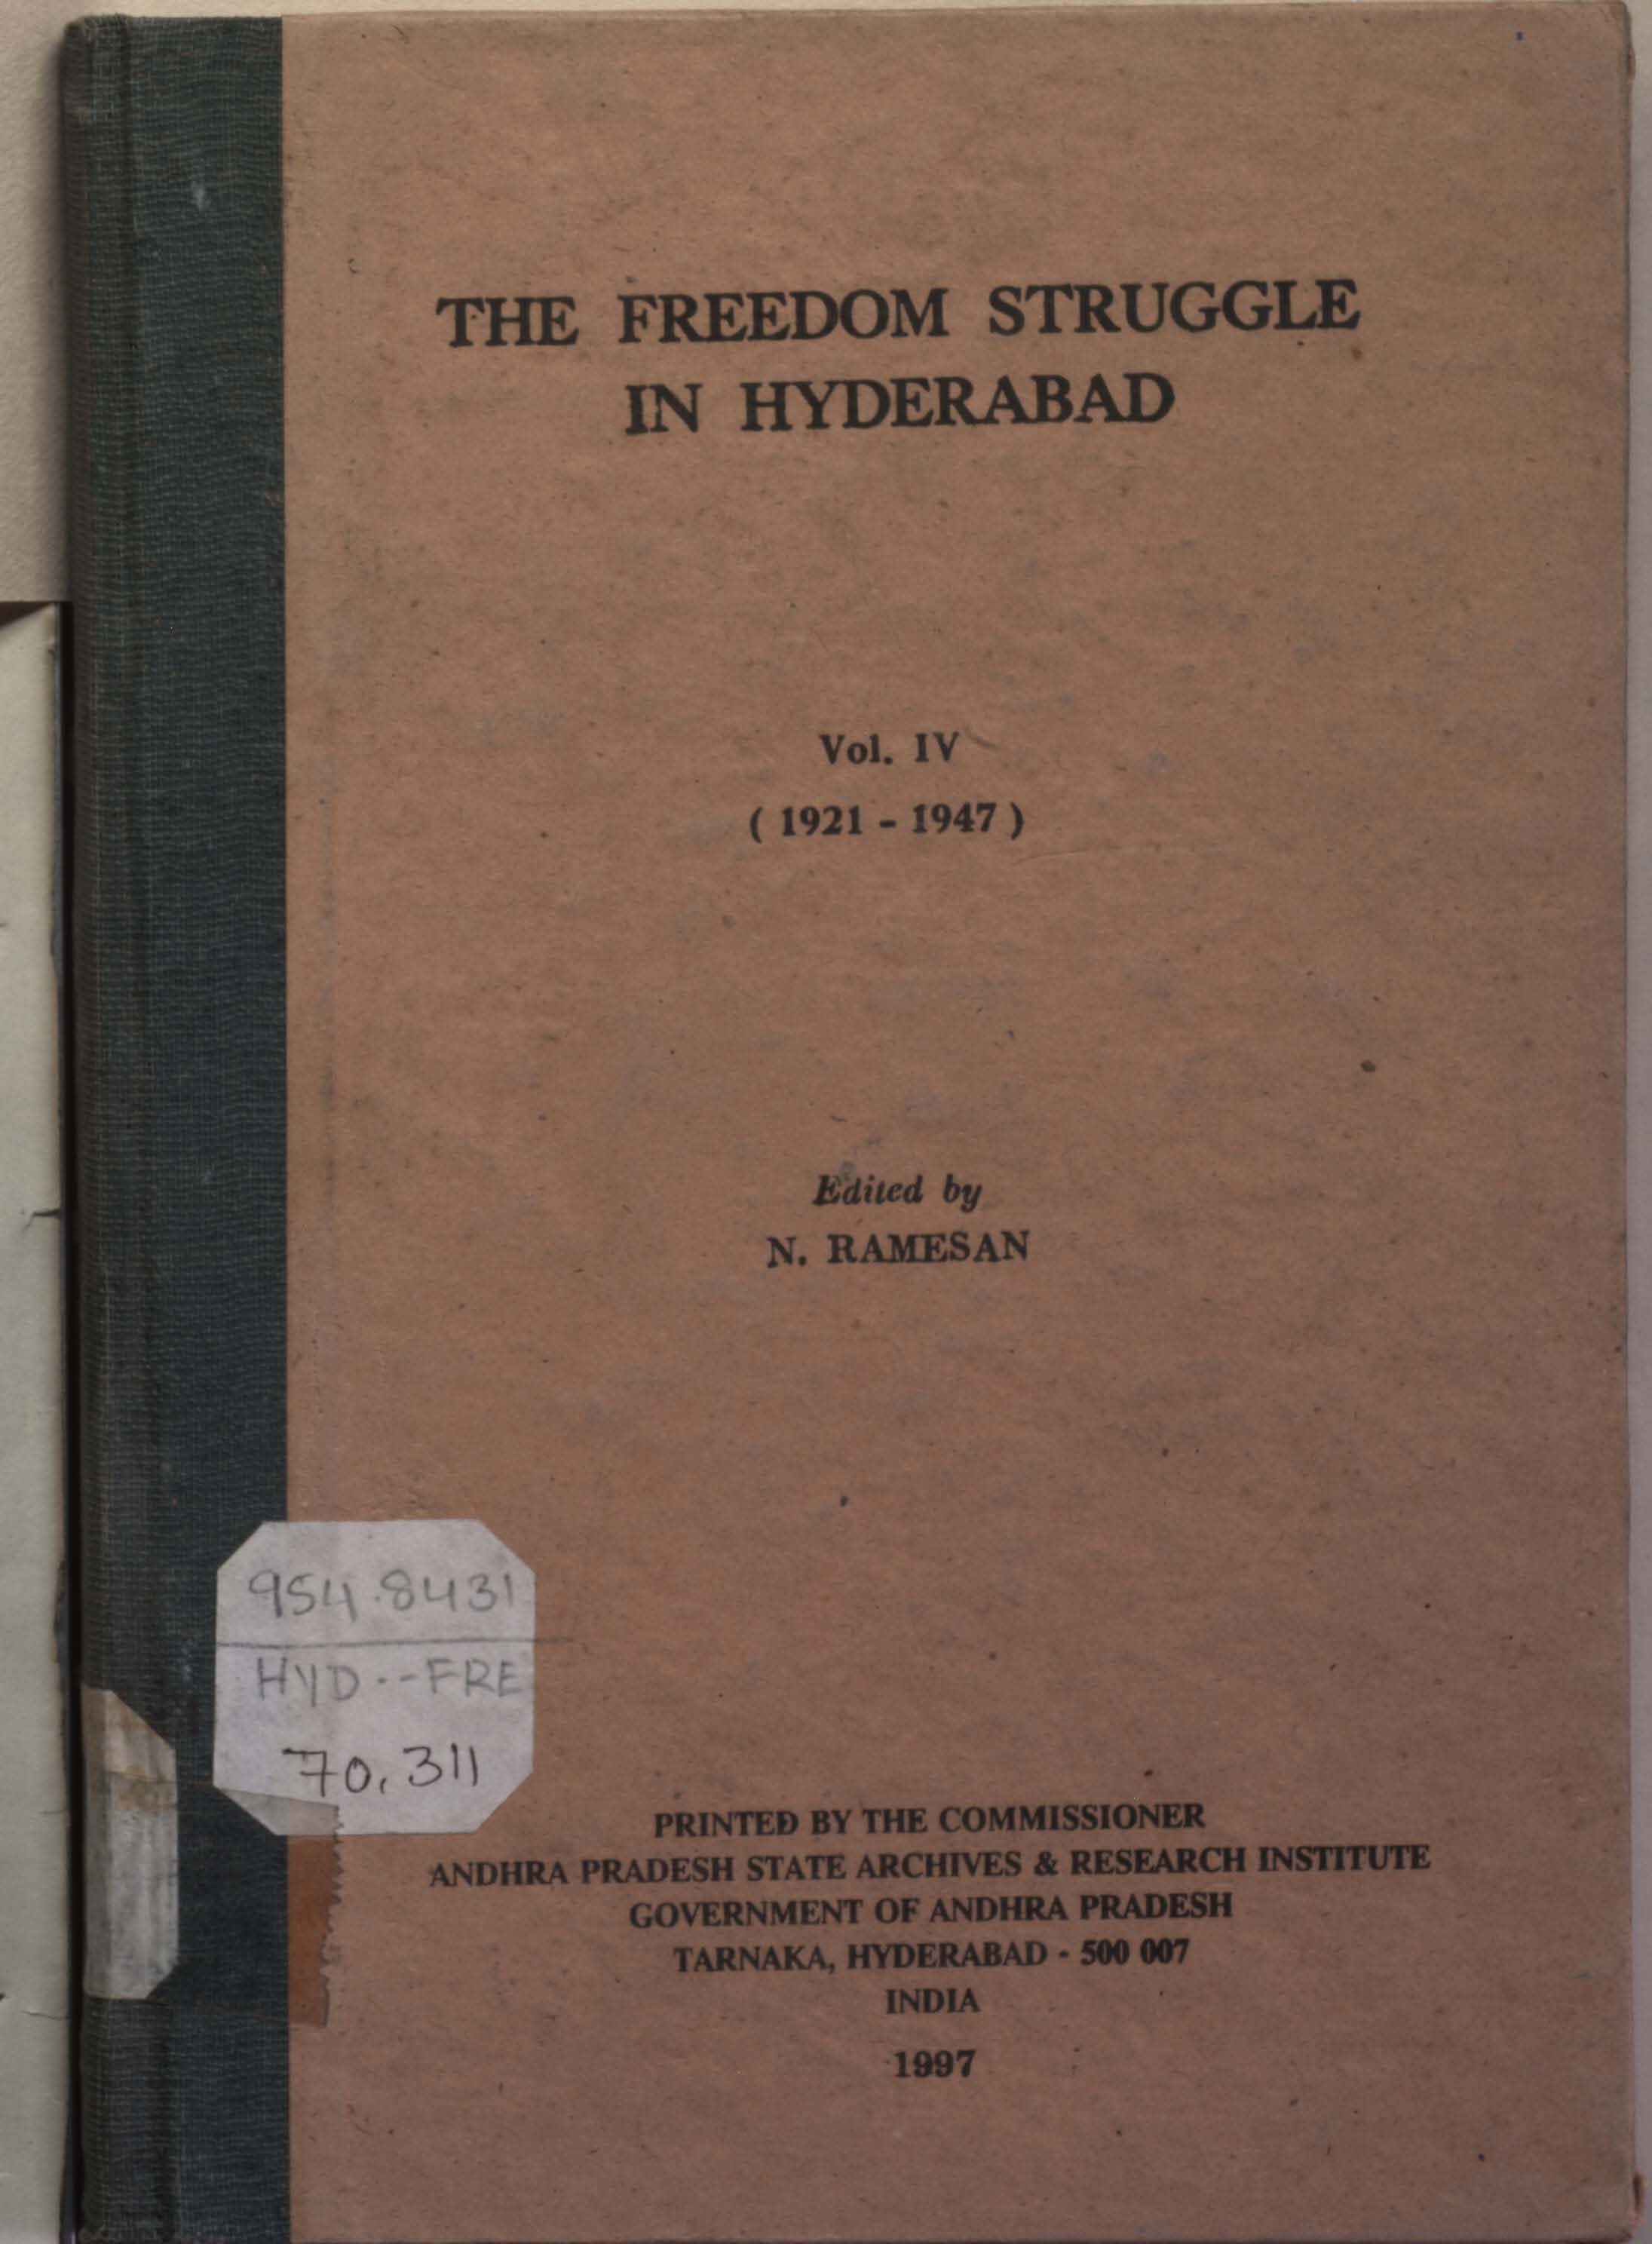 The Freedom Struggle in Hyderabad Vol - IV (1921-1947)